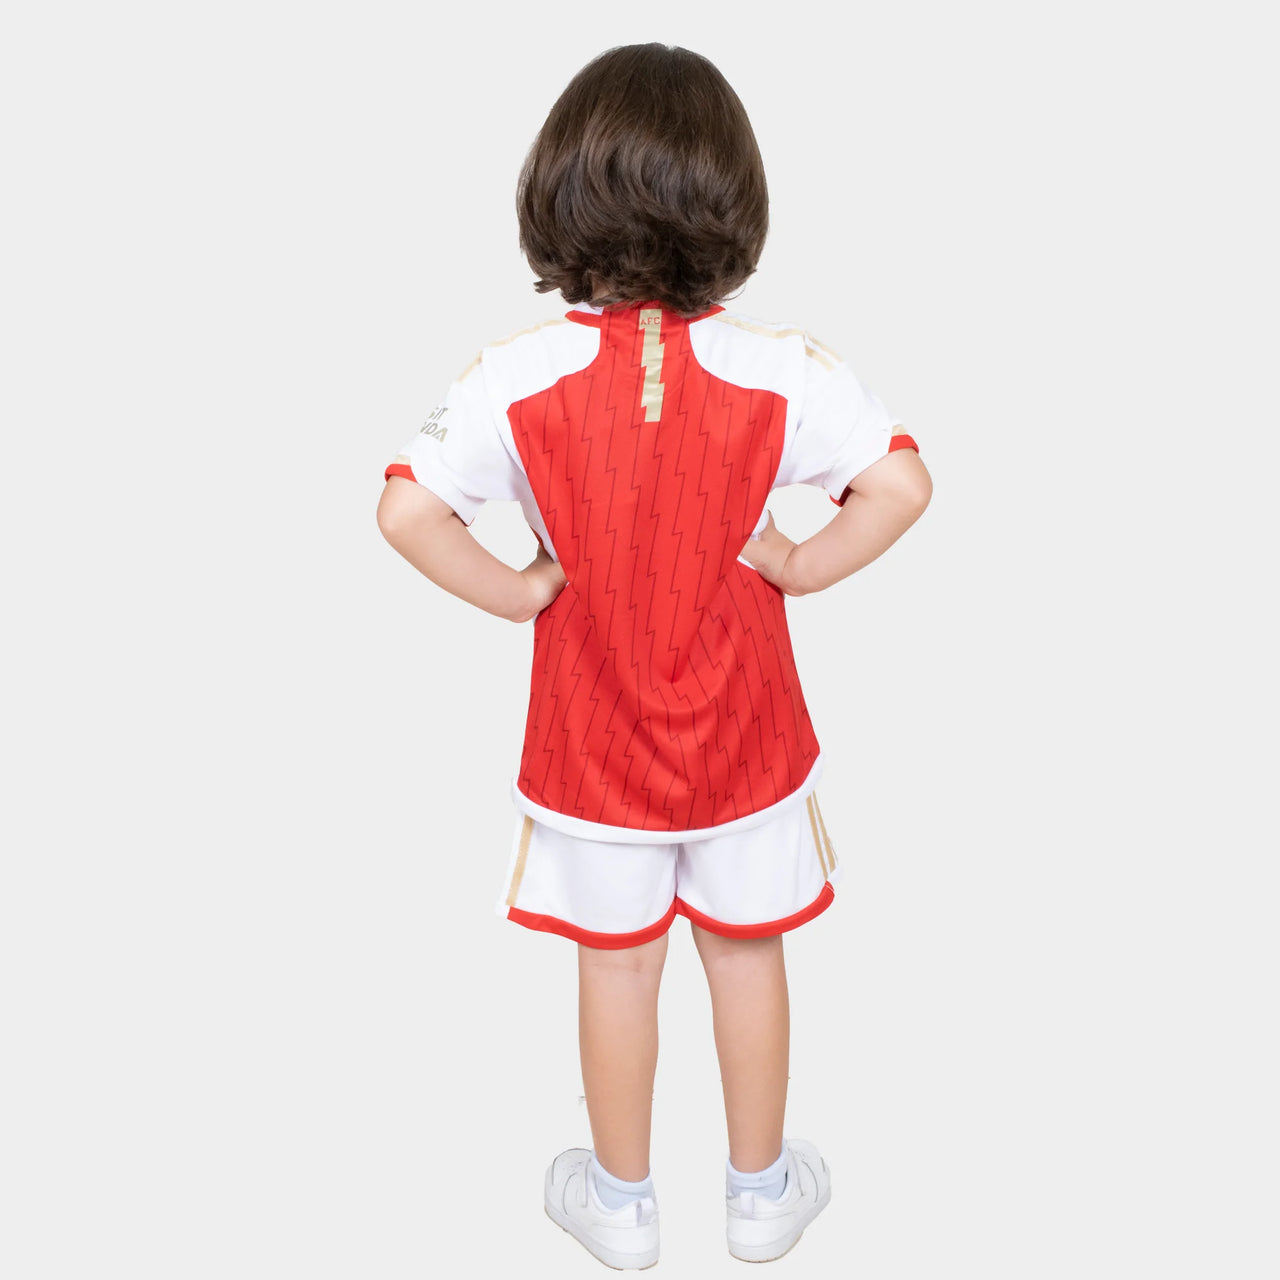 Arsenal Kids Kit Home Season 23/24 Designed By Mitani Store , Regular Fit Jersey Short Sleeves And Round Neck Collar In Red Color